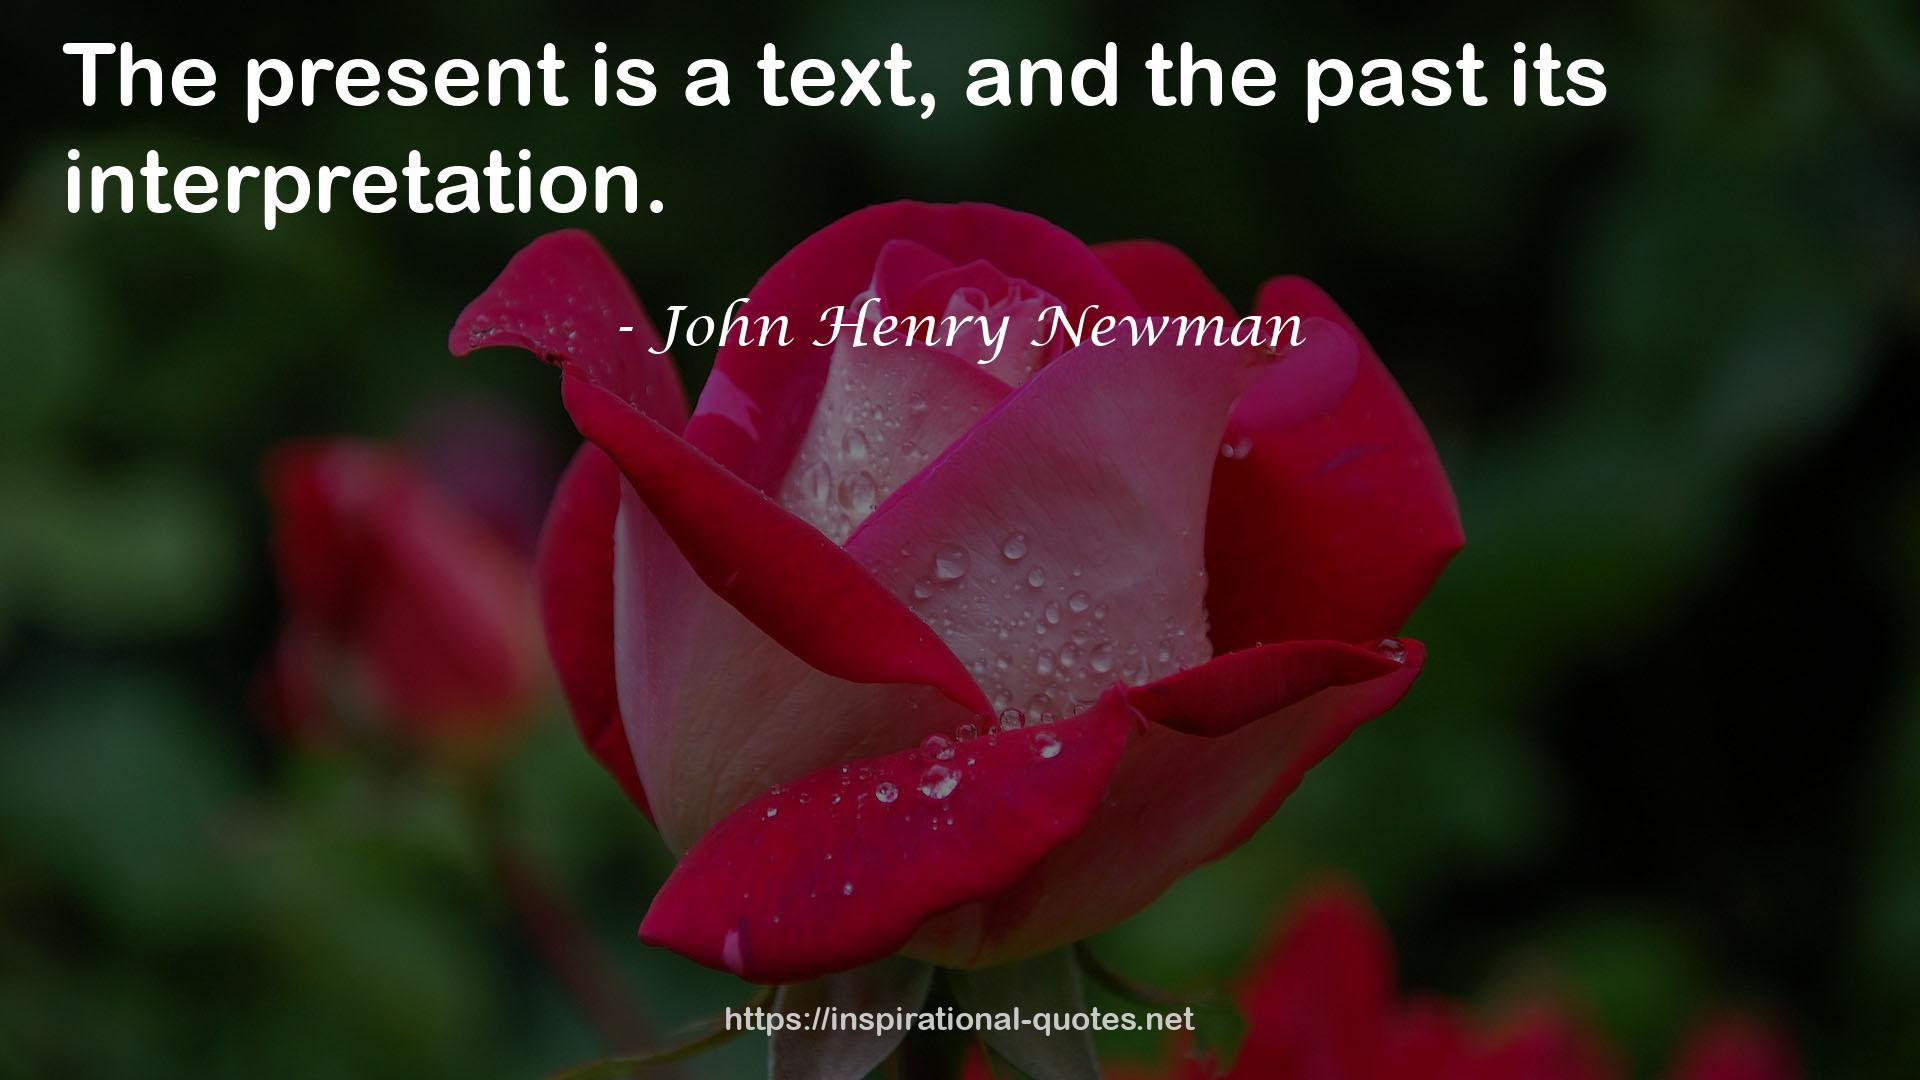 John Henry Newman QUOTES